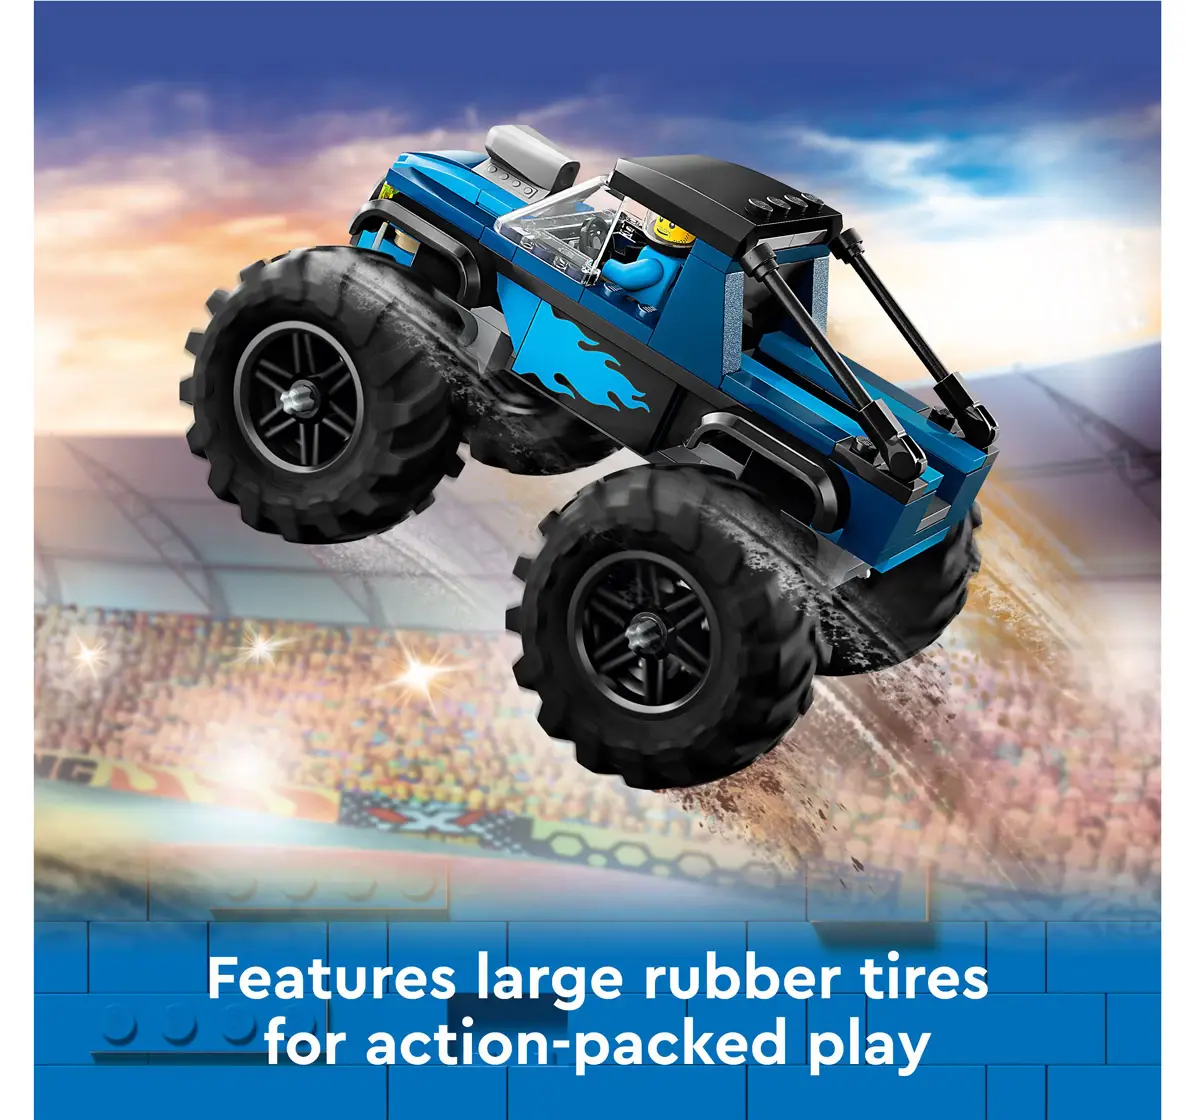 Lego City Blue Monster Truck Off-Road Toy 60402 Multicolour For Kids Ages 5Y+ (148 Pieces)